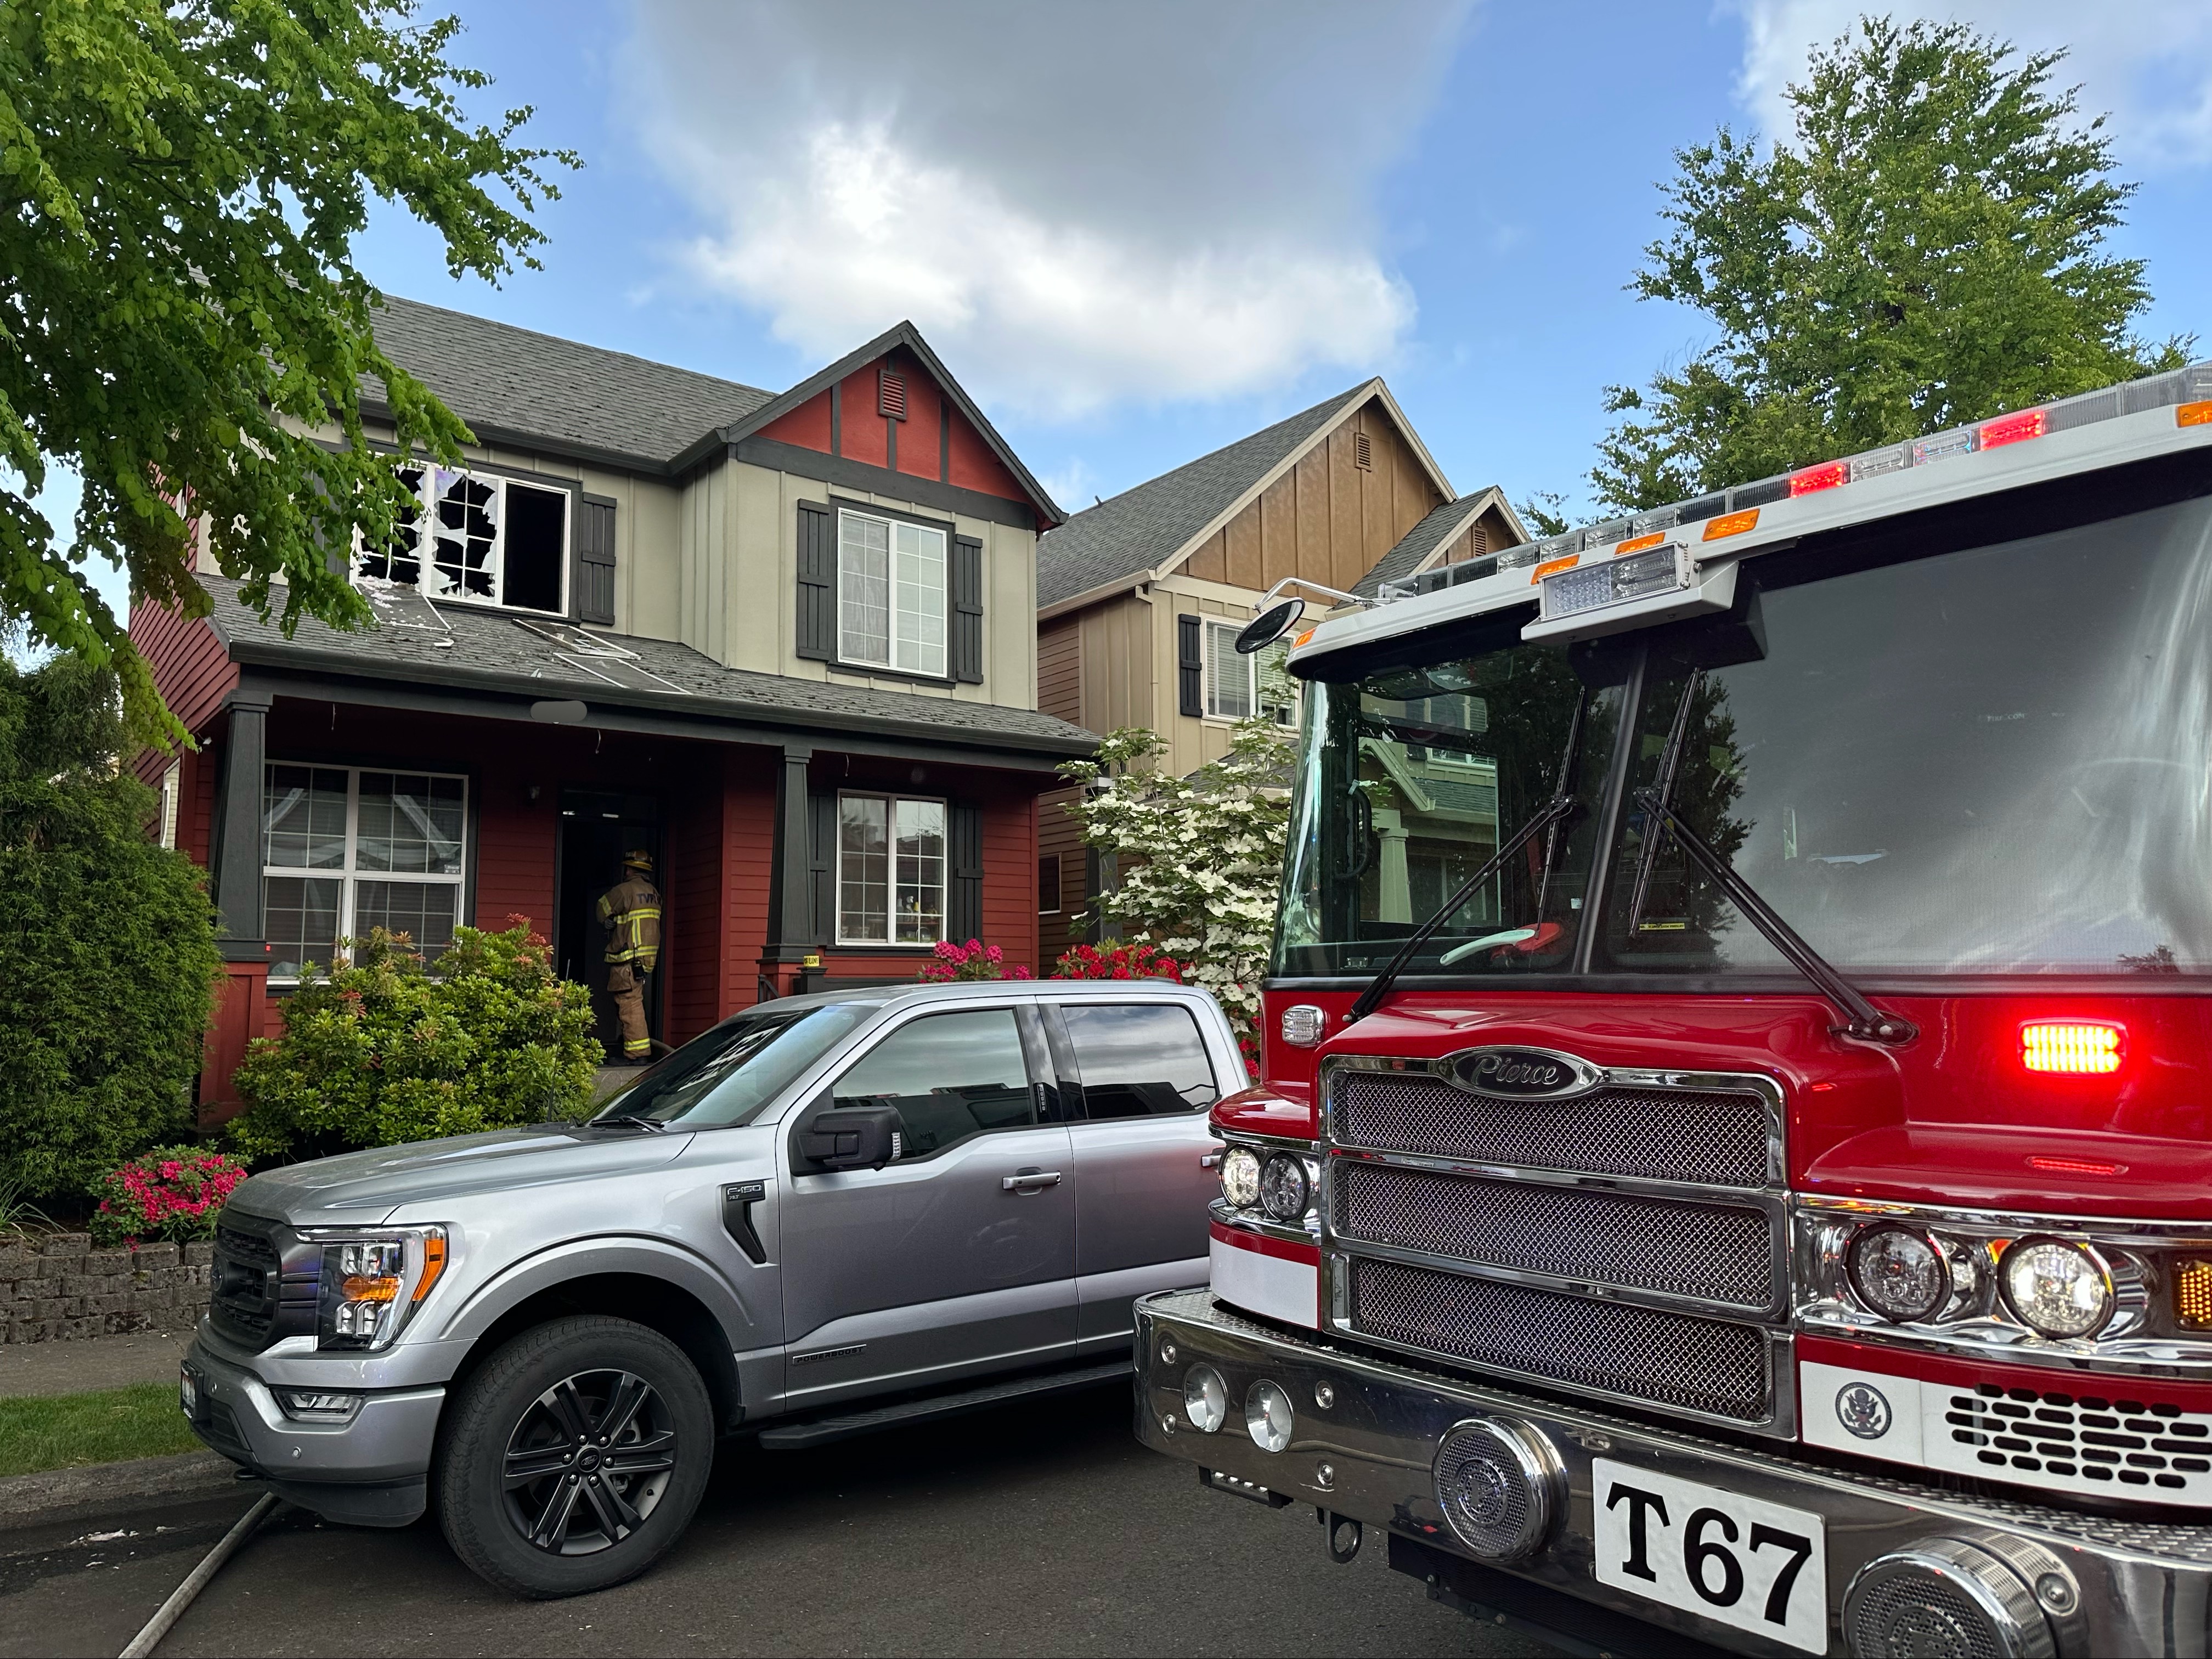 Tualatin Valley Fire & Rescue Find Person Deceased in House Fire in Aloha